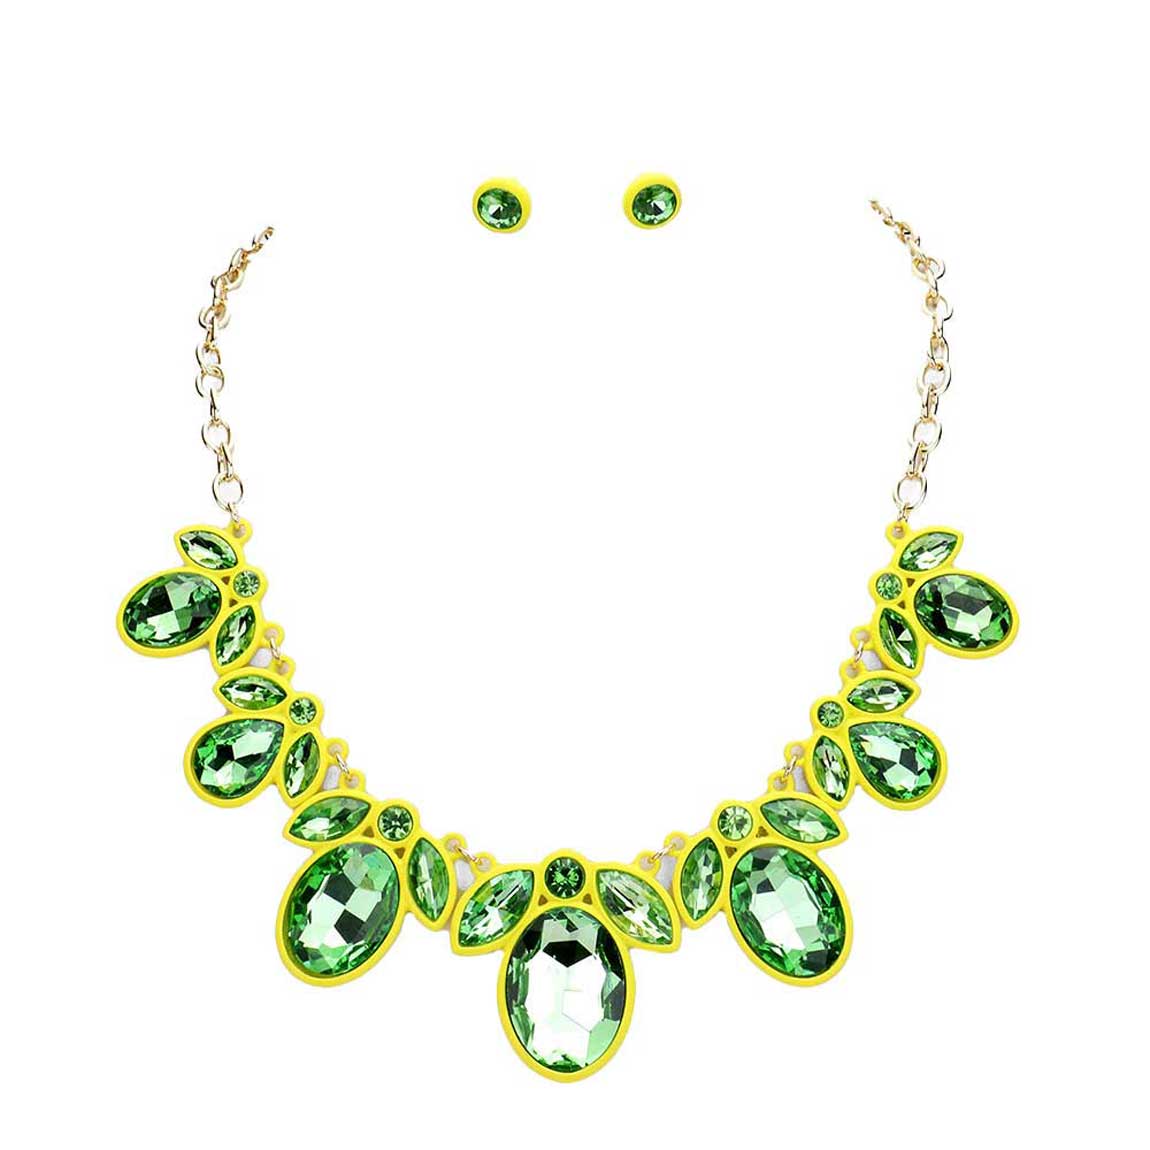 Green Oval Marquise Glass Crystal Collar Necklace. These gorgeous Crystal pieces will show your class in any special occasion. The elegance of these Crystal goes unmatched, great for wearing at a party! Perfect jewelry to enhance your look. Awesome gift for birthday, Anniversary, Valentine’s Day or any special occasion.